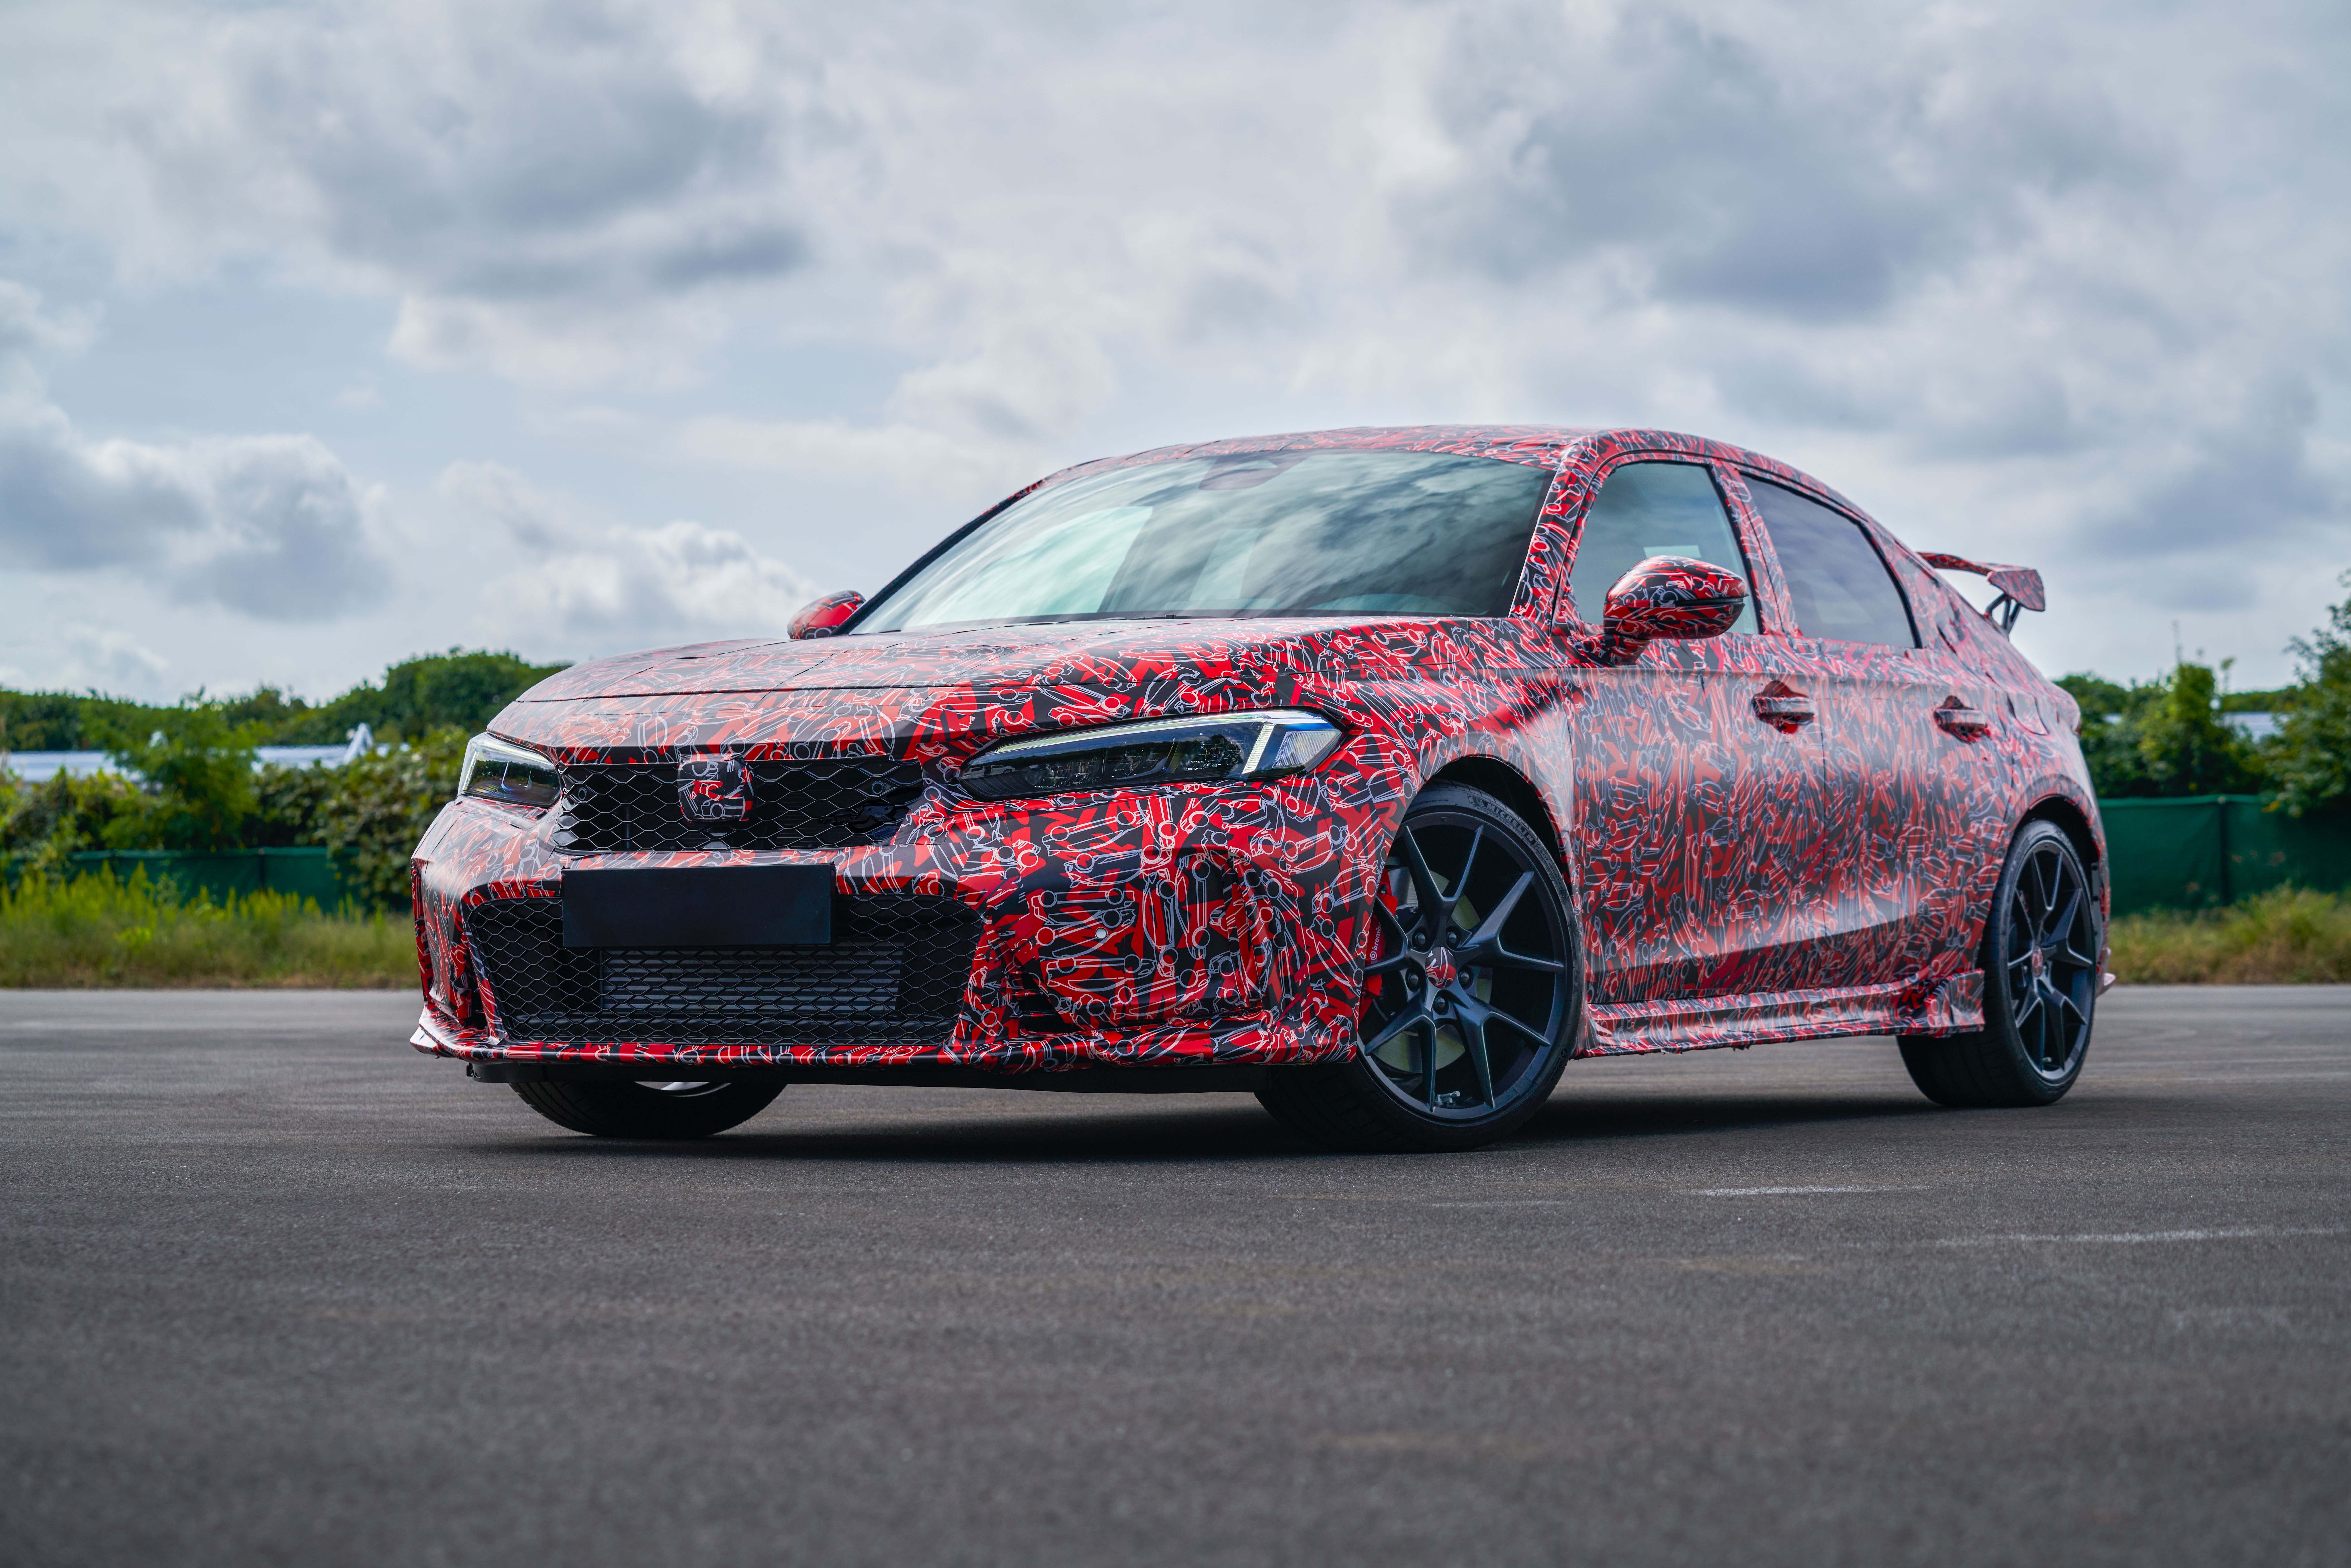 What We Know About the Upcoming 2022 Honda Civic Type R